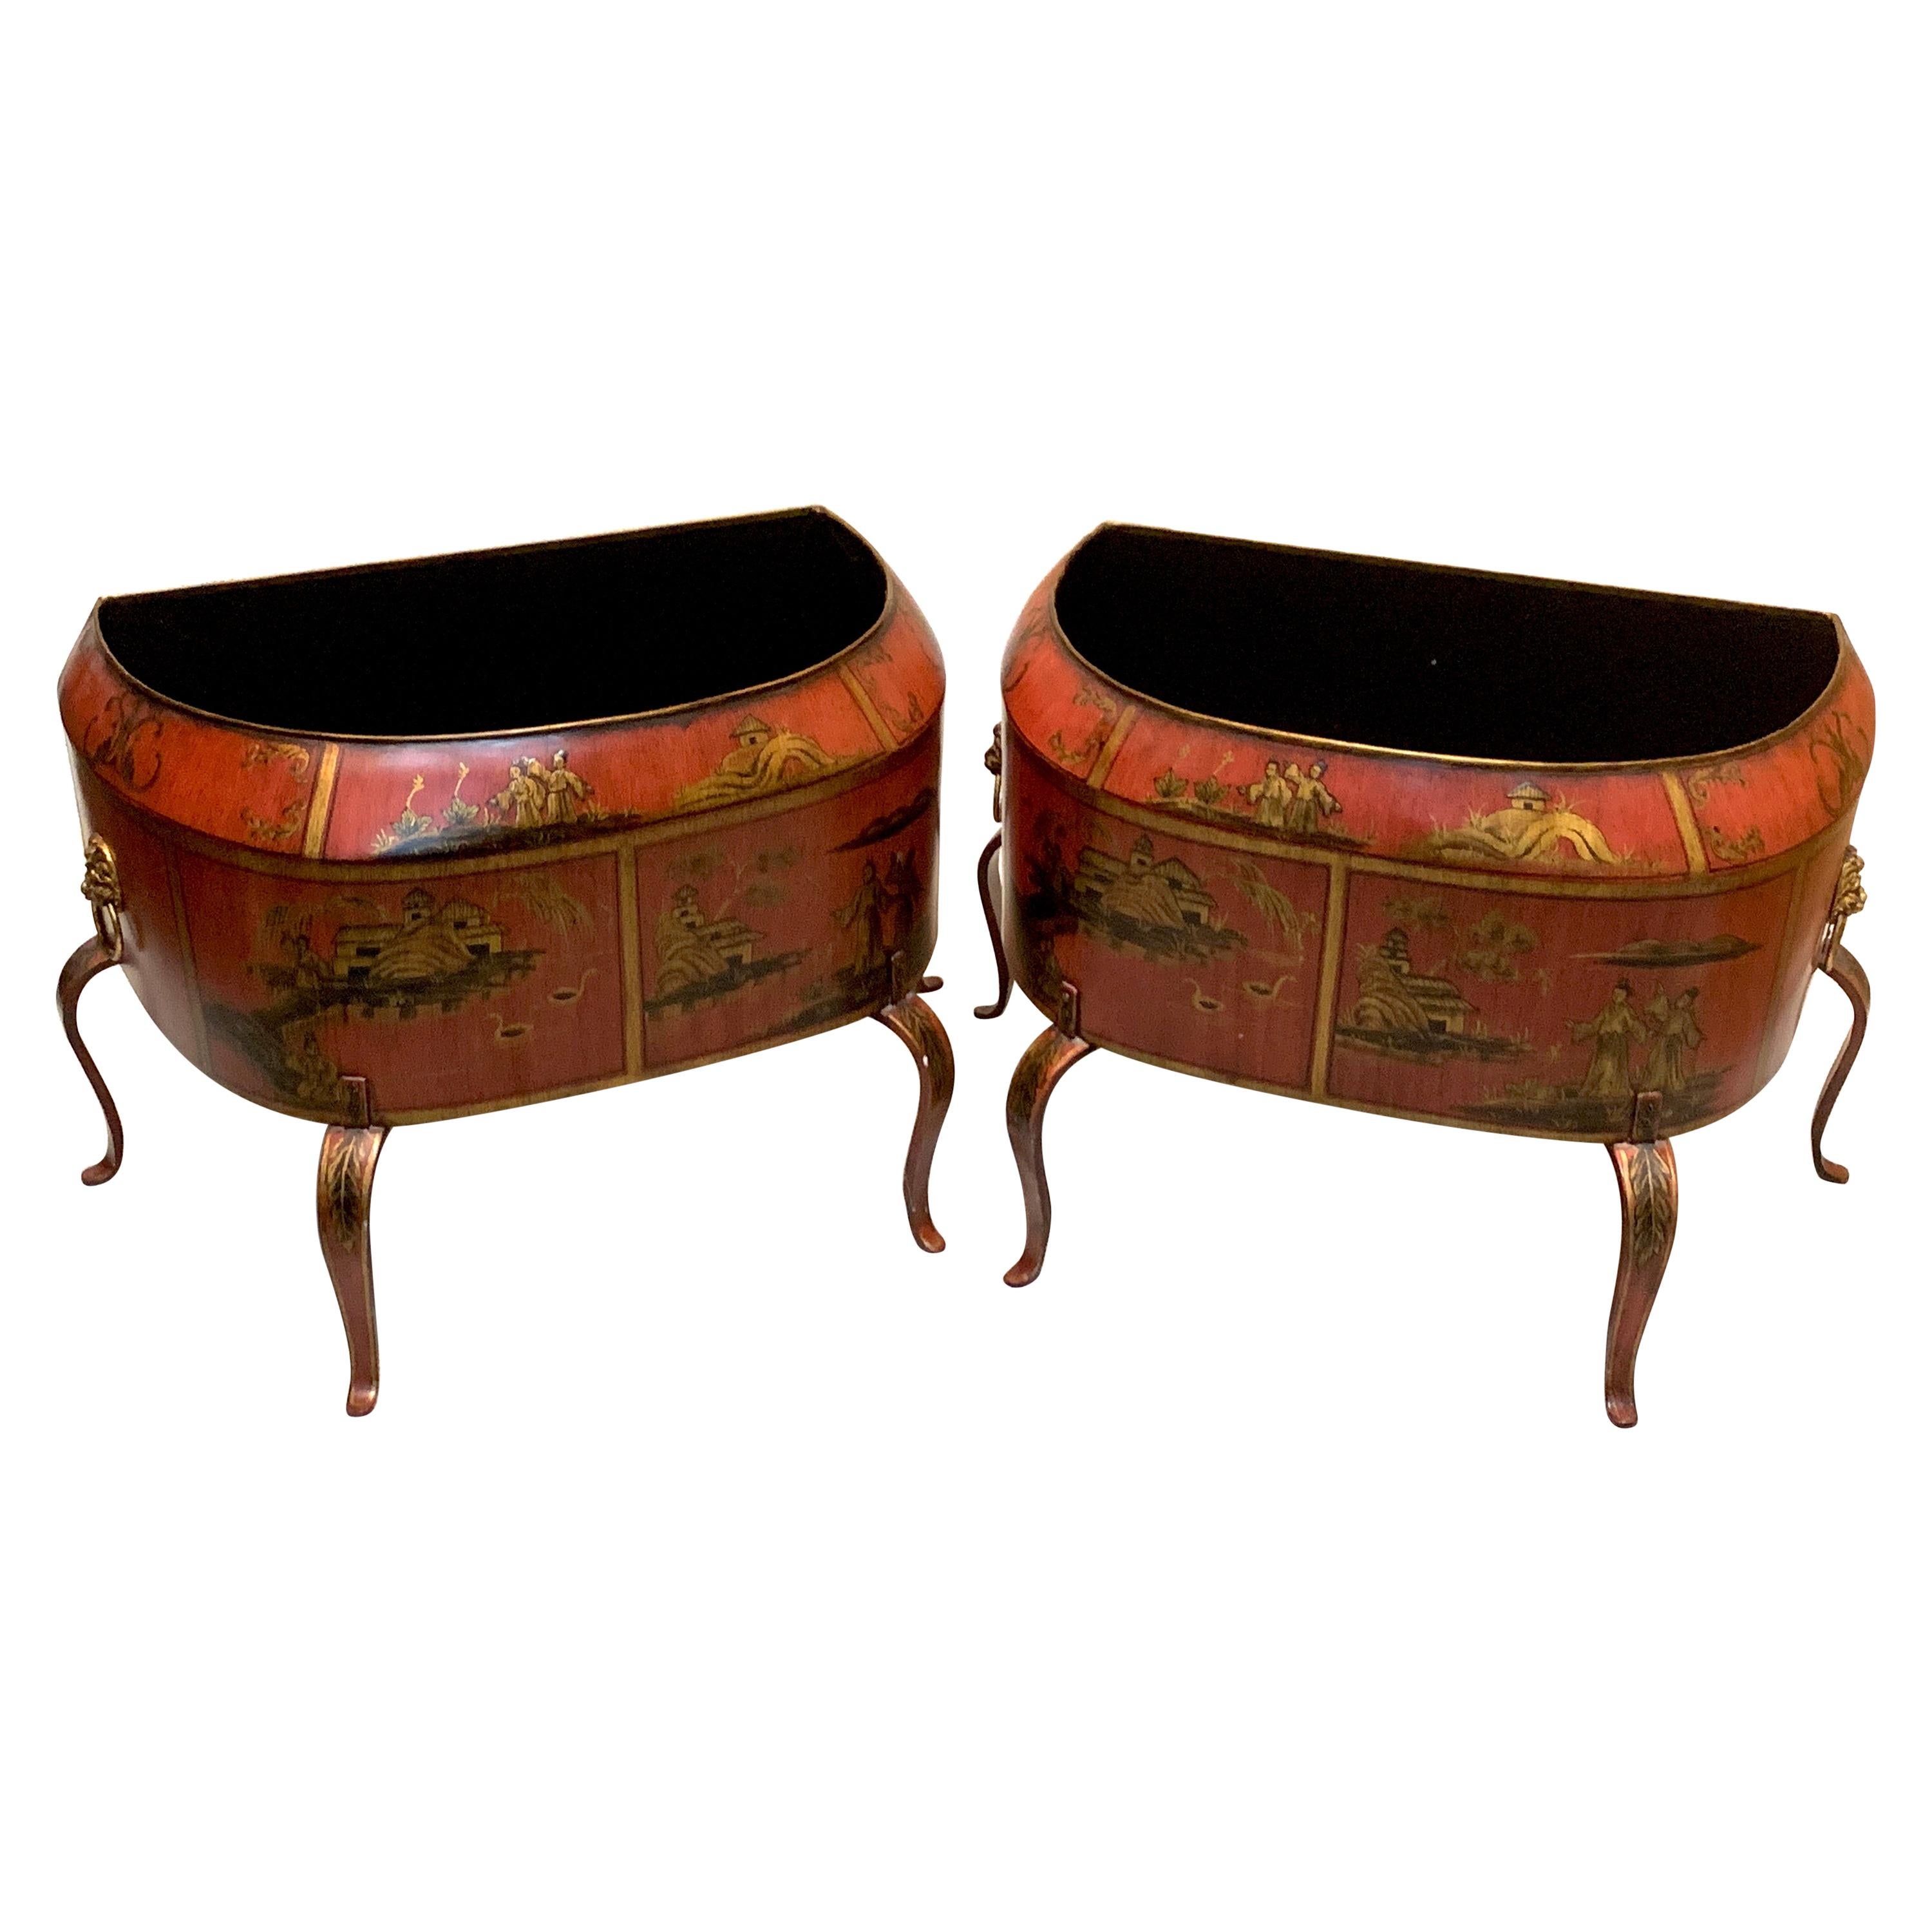 Pair of Italian Red Tole Chinoiserie Gilt Decorated Floor Planters For Sale